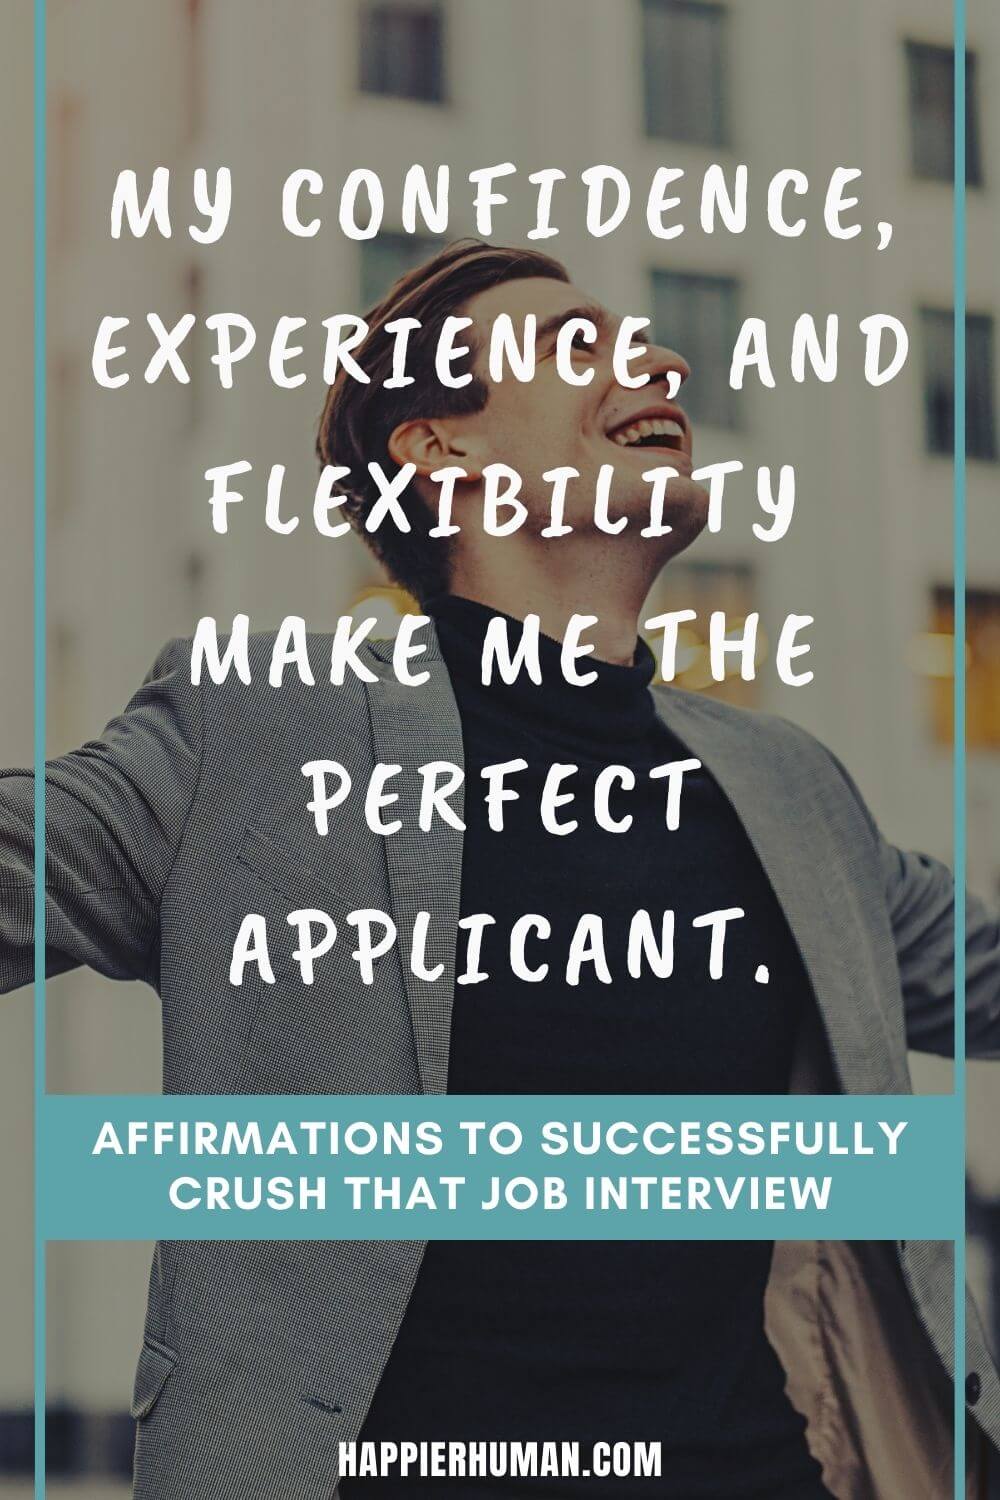 Affirmations for Job Interview - My confidence, experience, and flexibility make me the perfect applicant. | job interview confidence quotes | positive affirmations | day before job interview